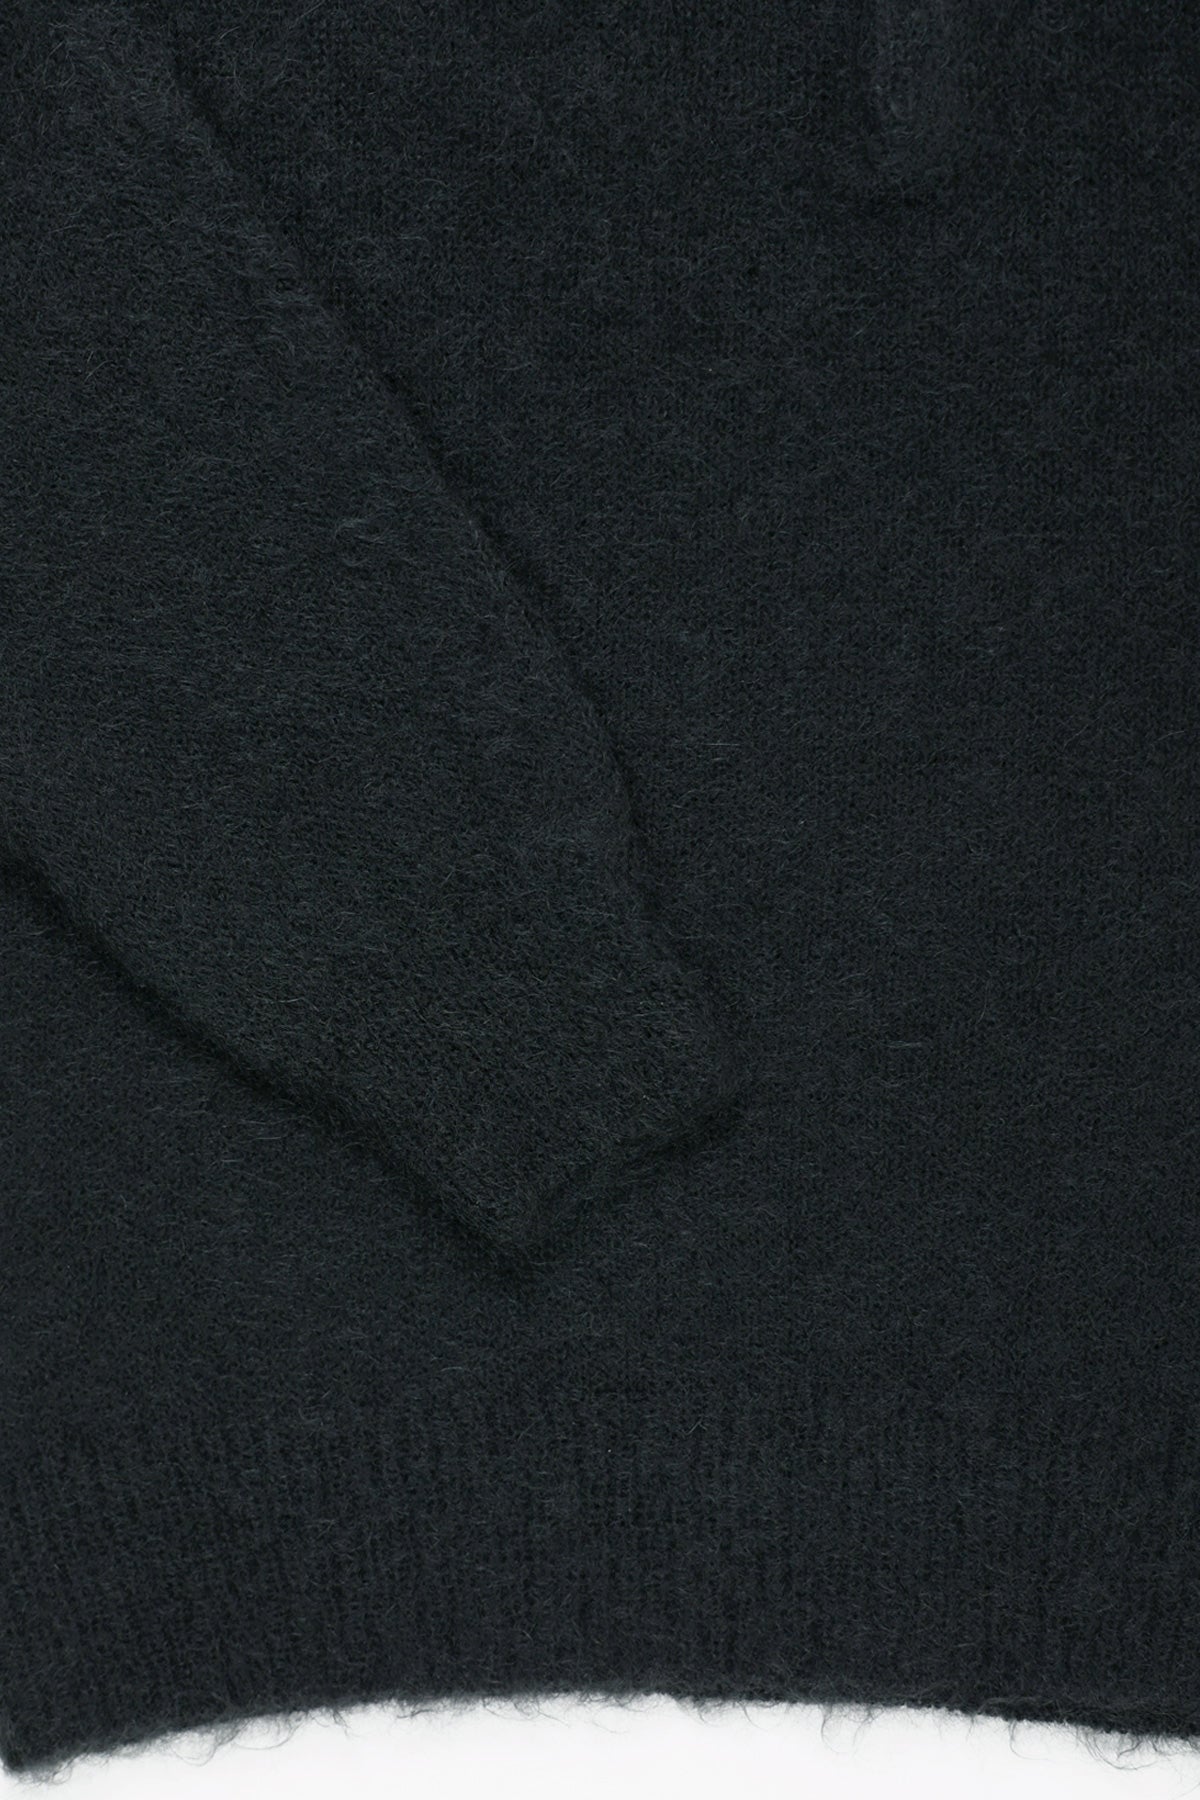 Auralee Brushed Super Kid Mohair Knit Polo | Ink Black | Canoe Club